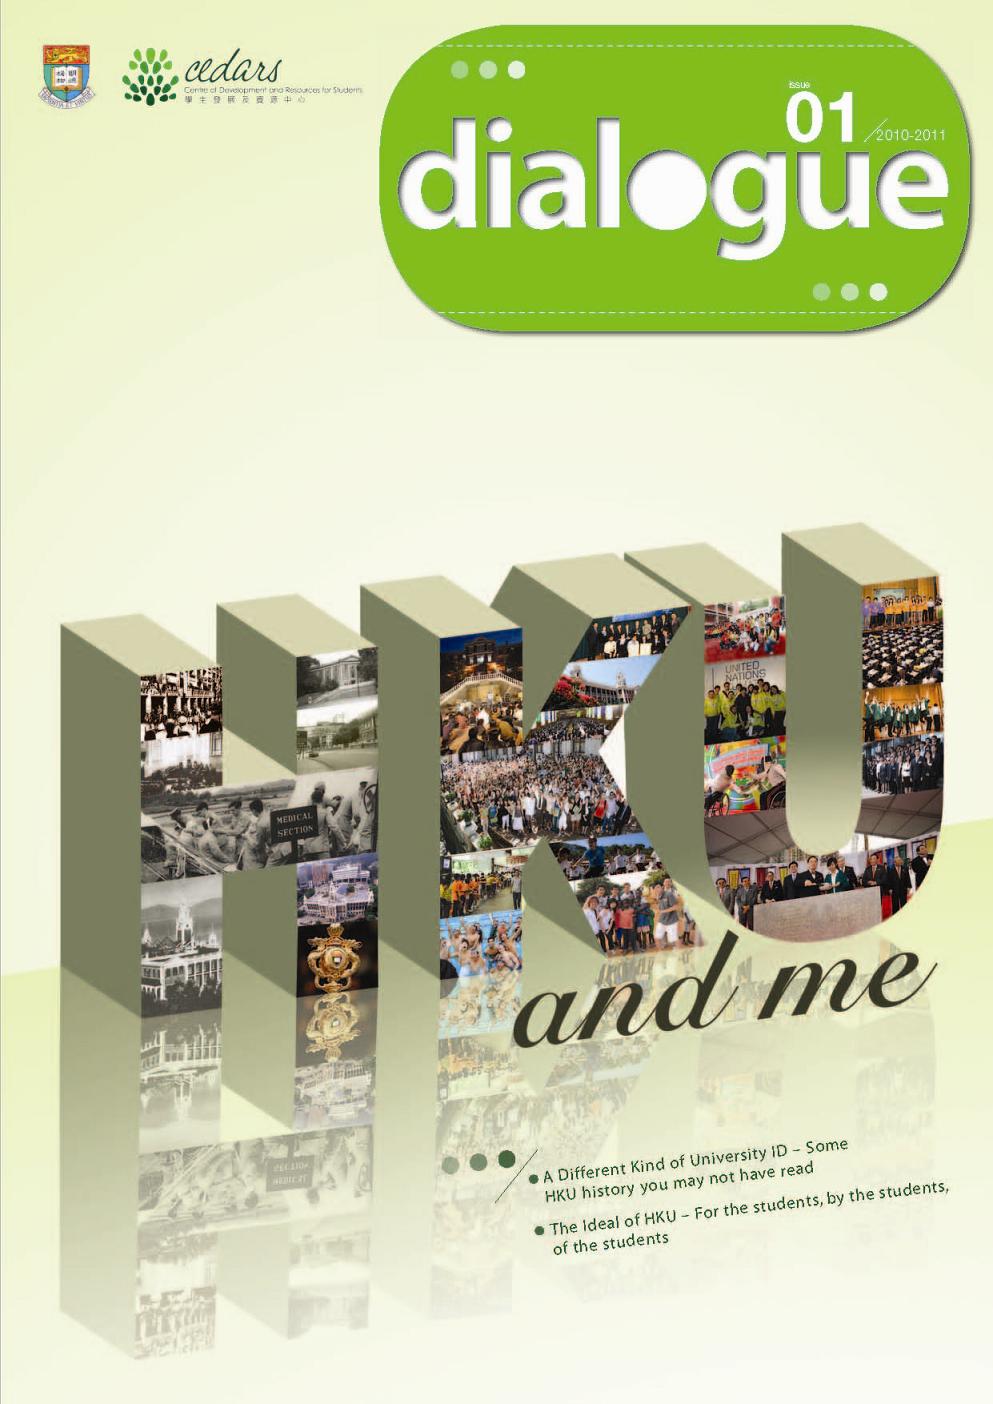 Newest Issue of "Dialogue"